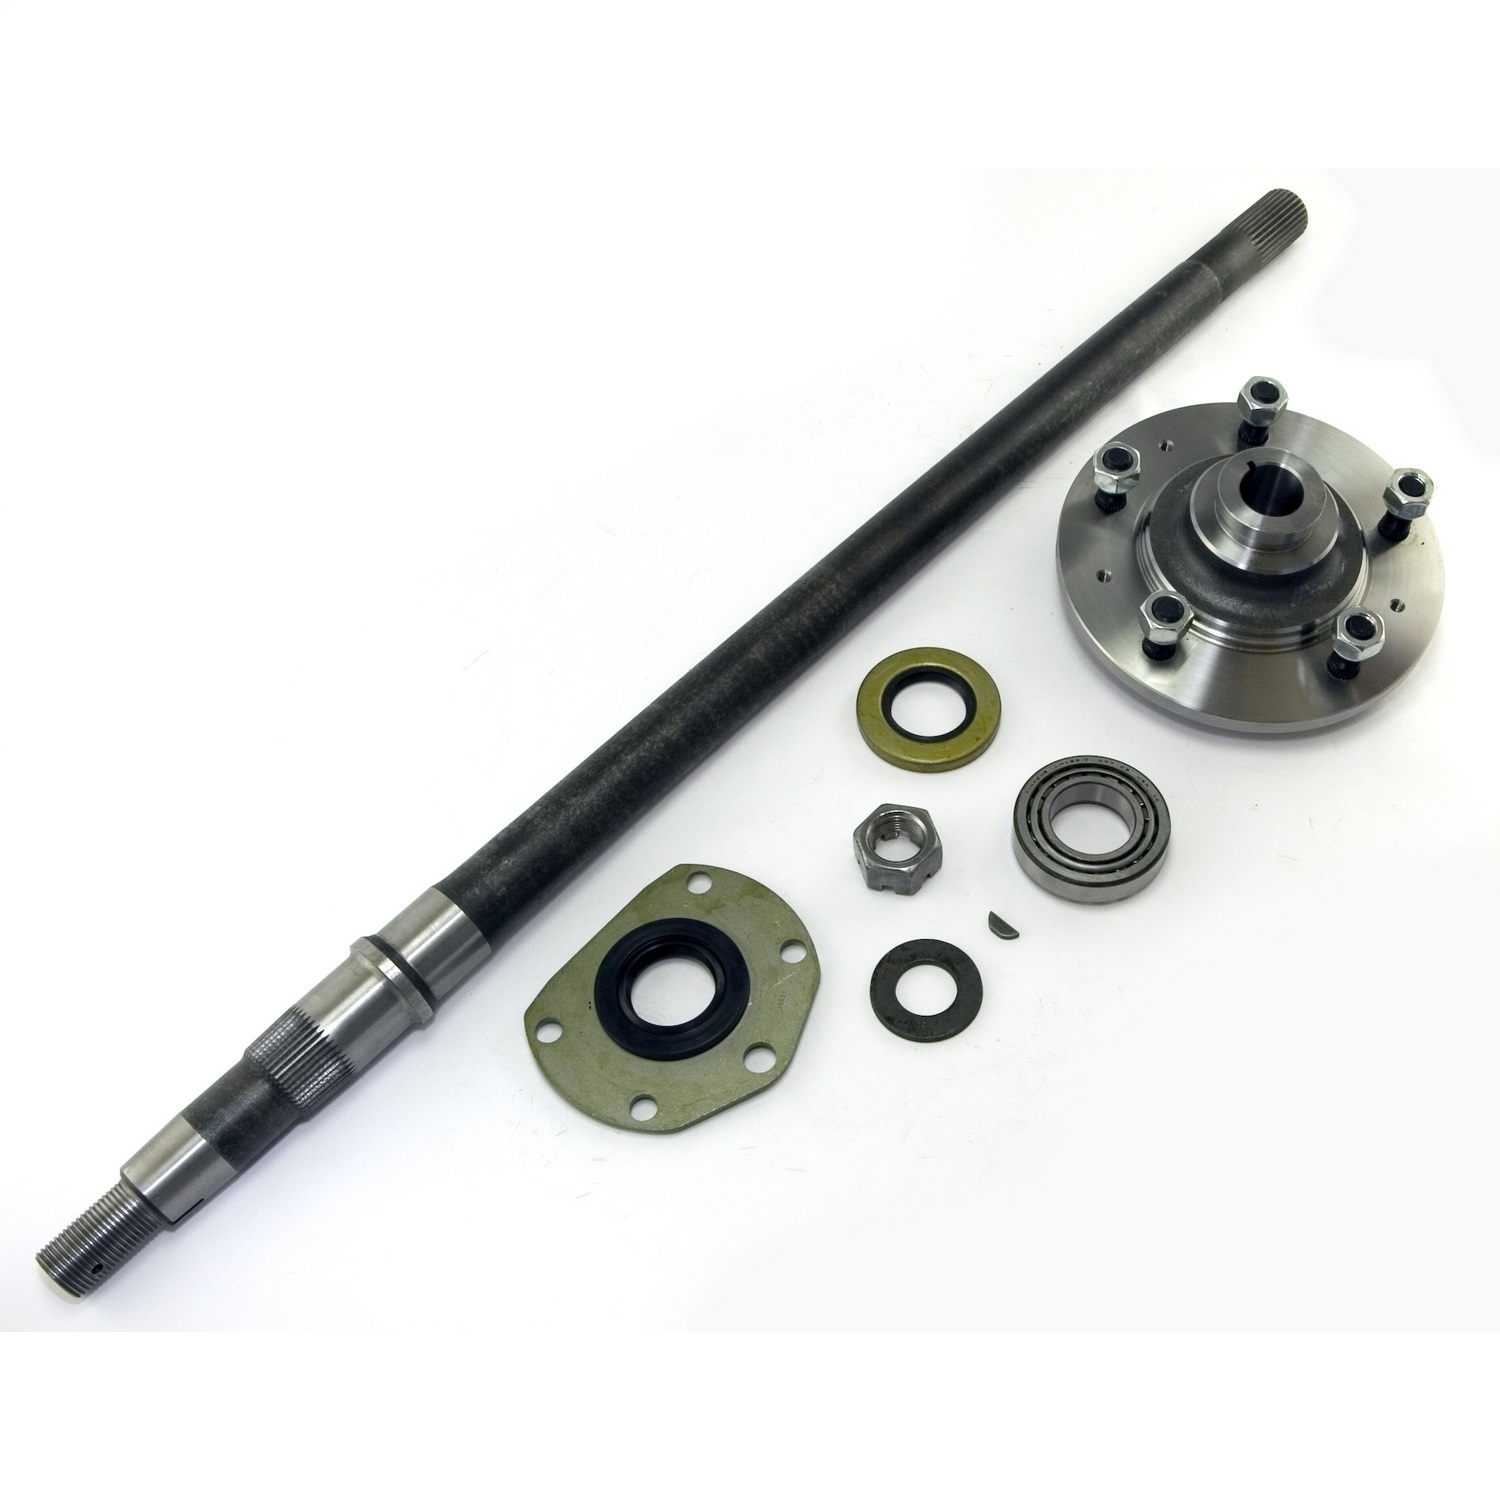 Jeep Omix Axle Shaft (Amc 20 Wide Track), Rh (31.5-Inch), Includes: Axle, Hub, Bearing, Cup,